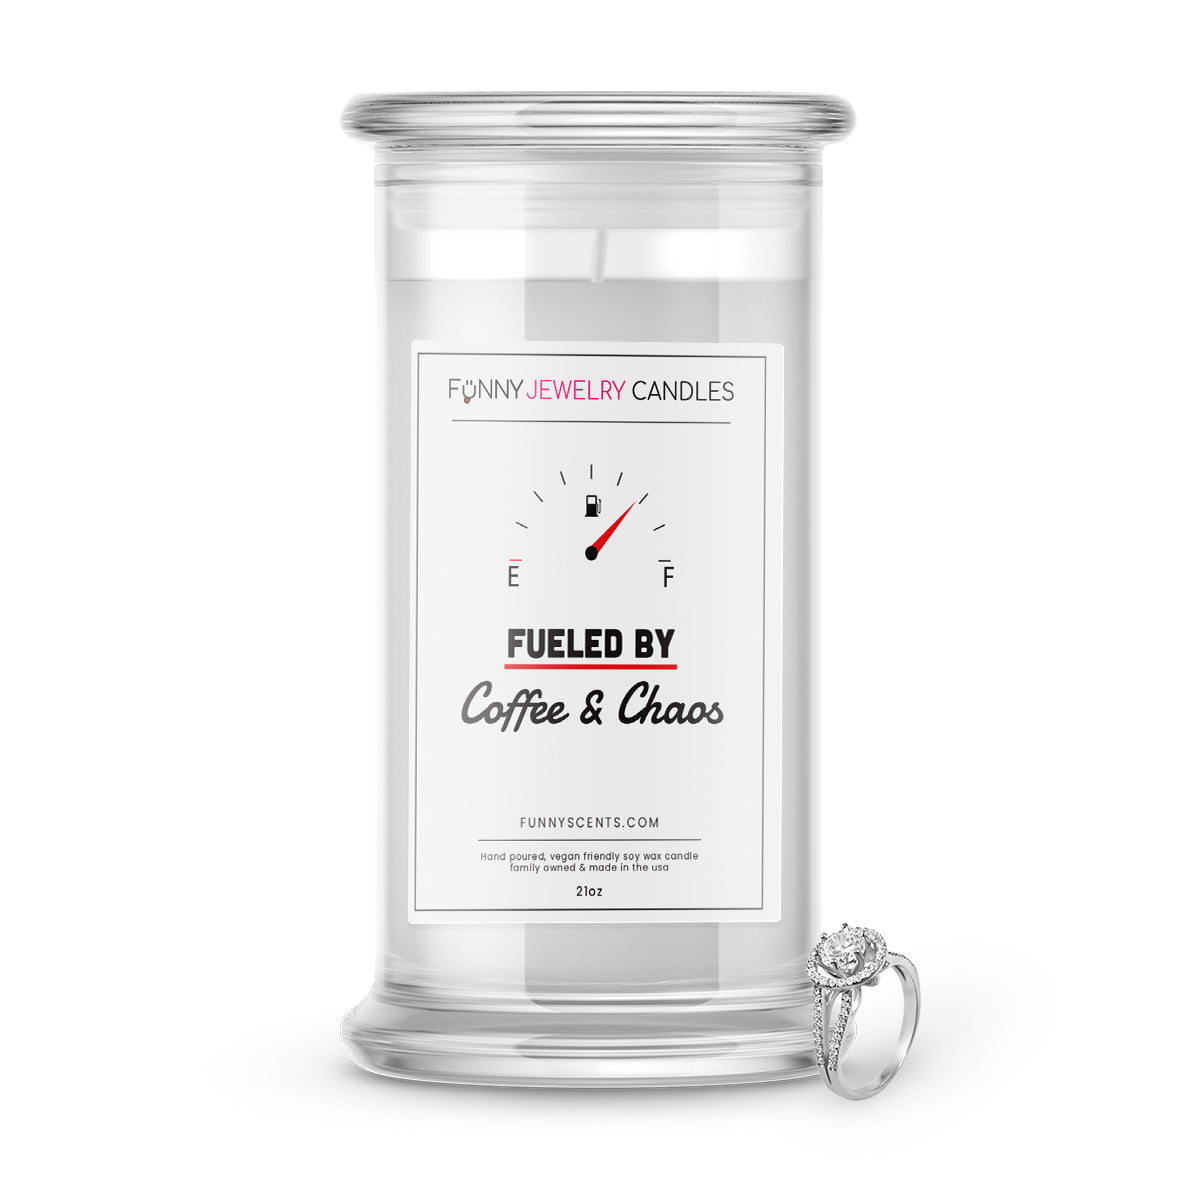 Fueled By Coffee and Chaos Jewelry Funny Candles